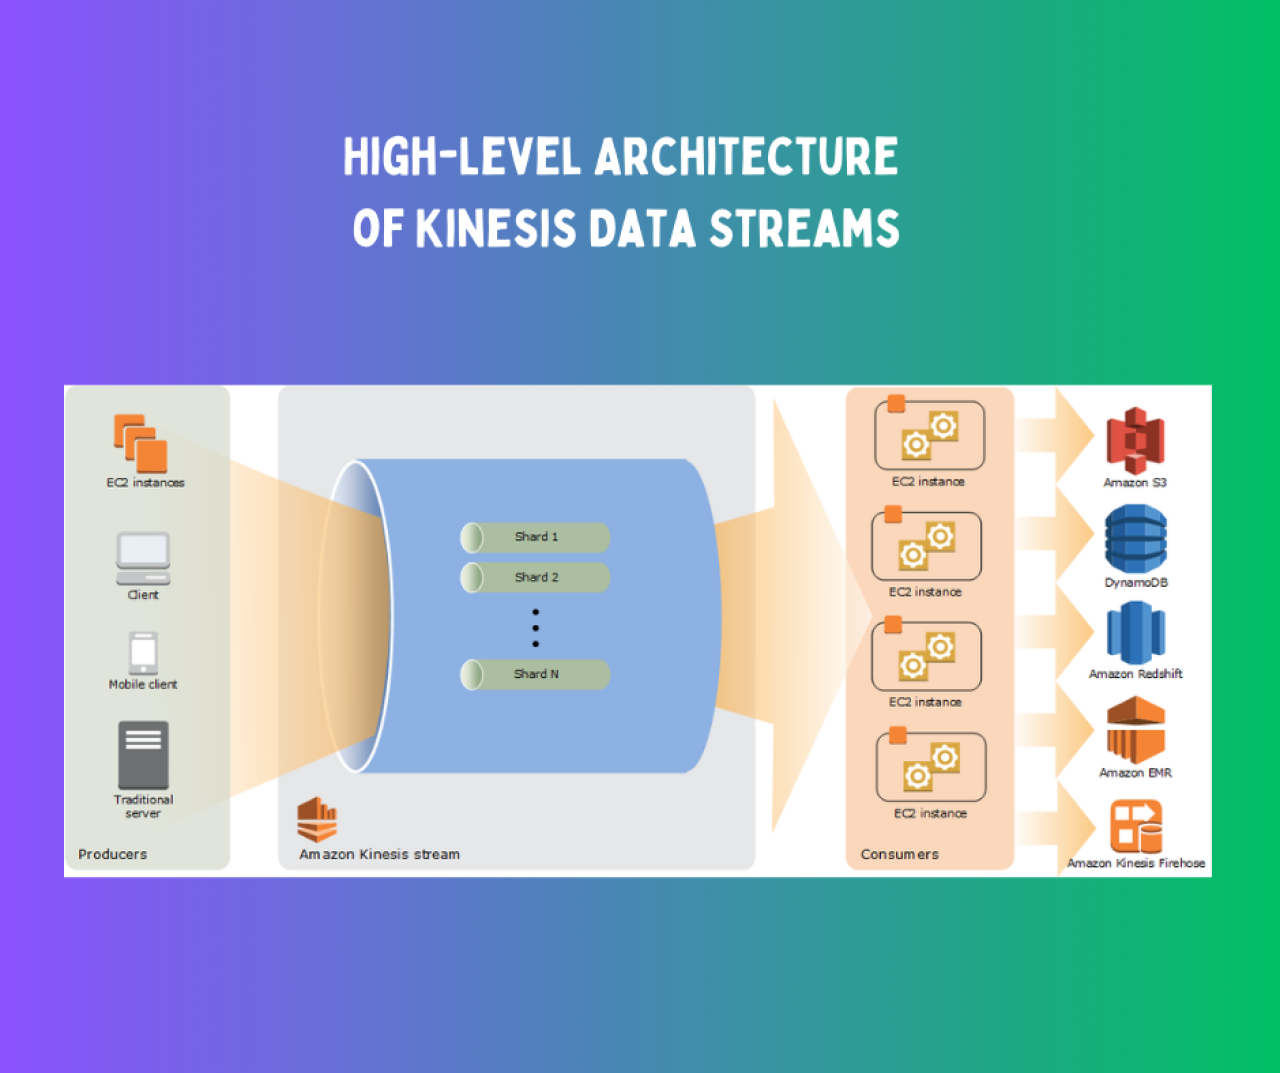 High-Level Architecture of Kinesis Data Streams.